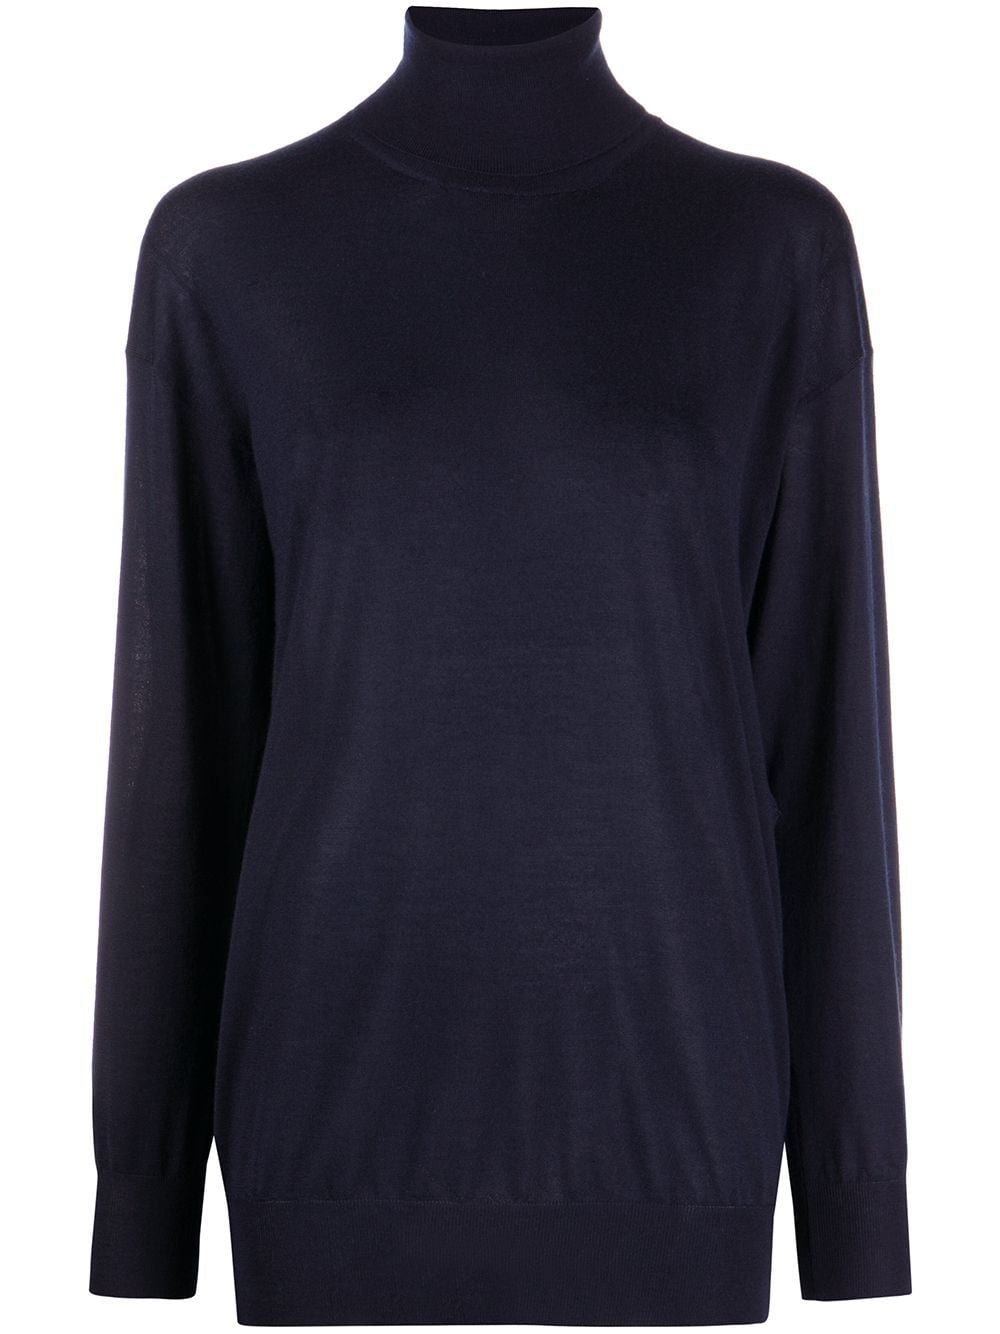 TOM FORD Luxurious Blue Cashmere Turtleneck Sweater for Women